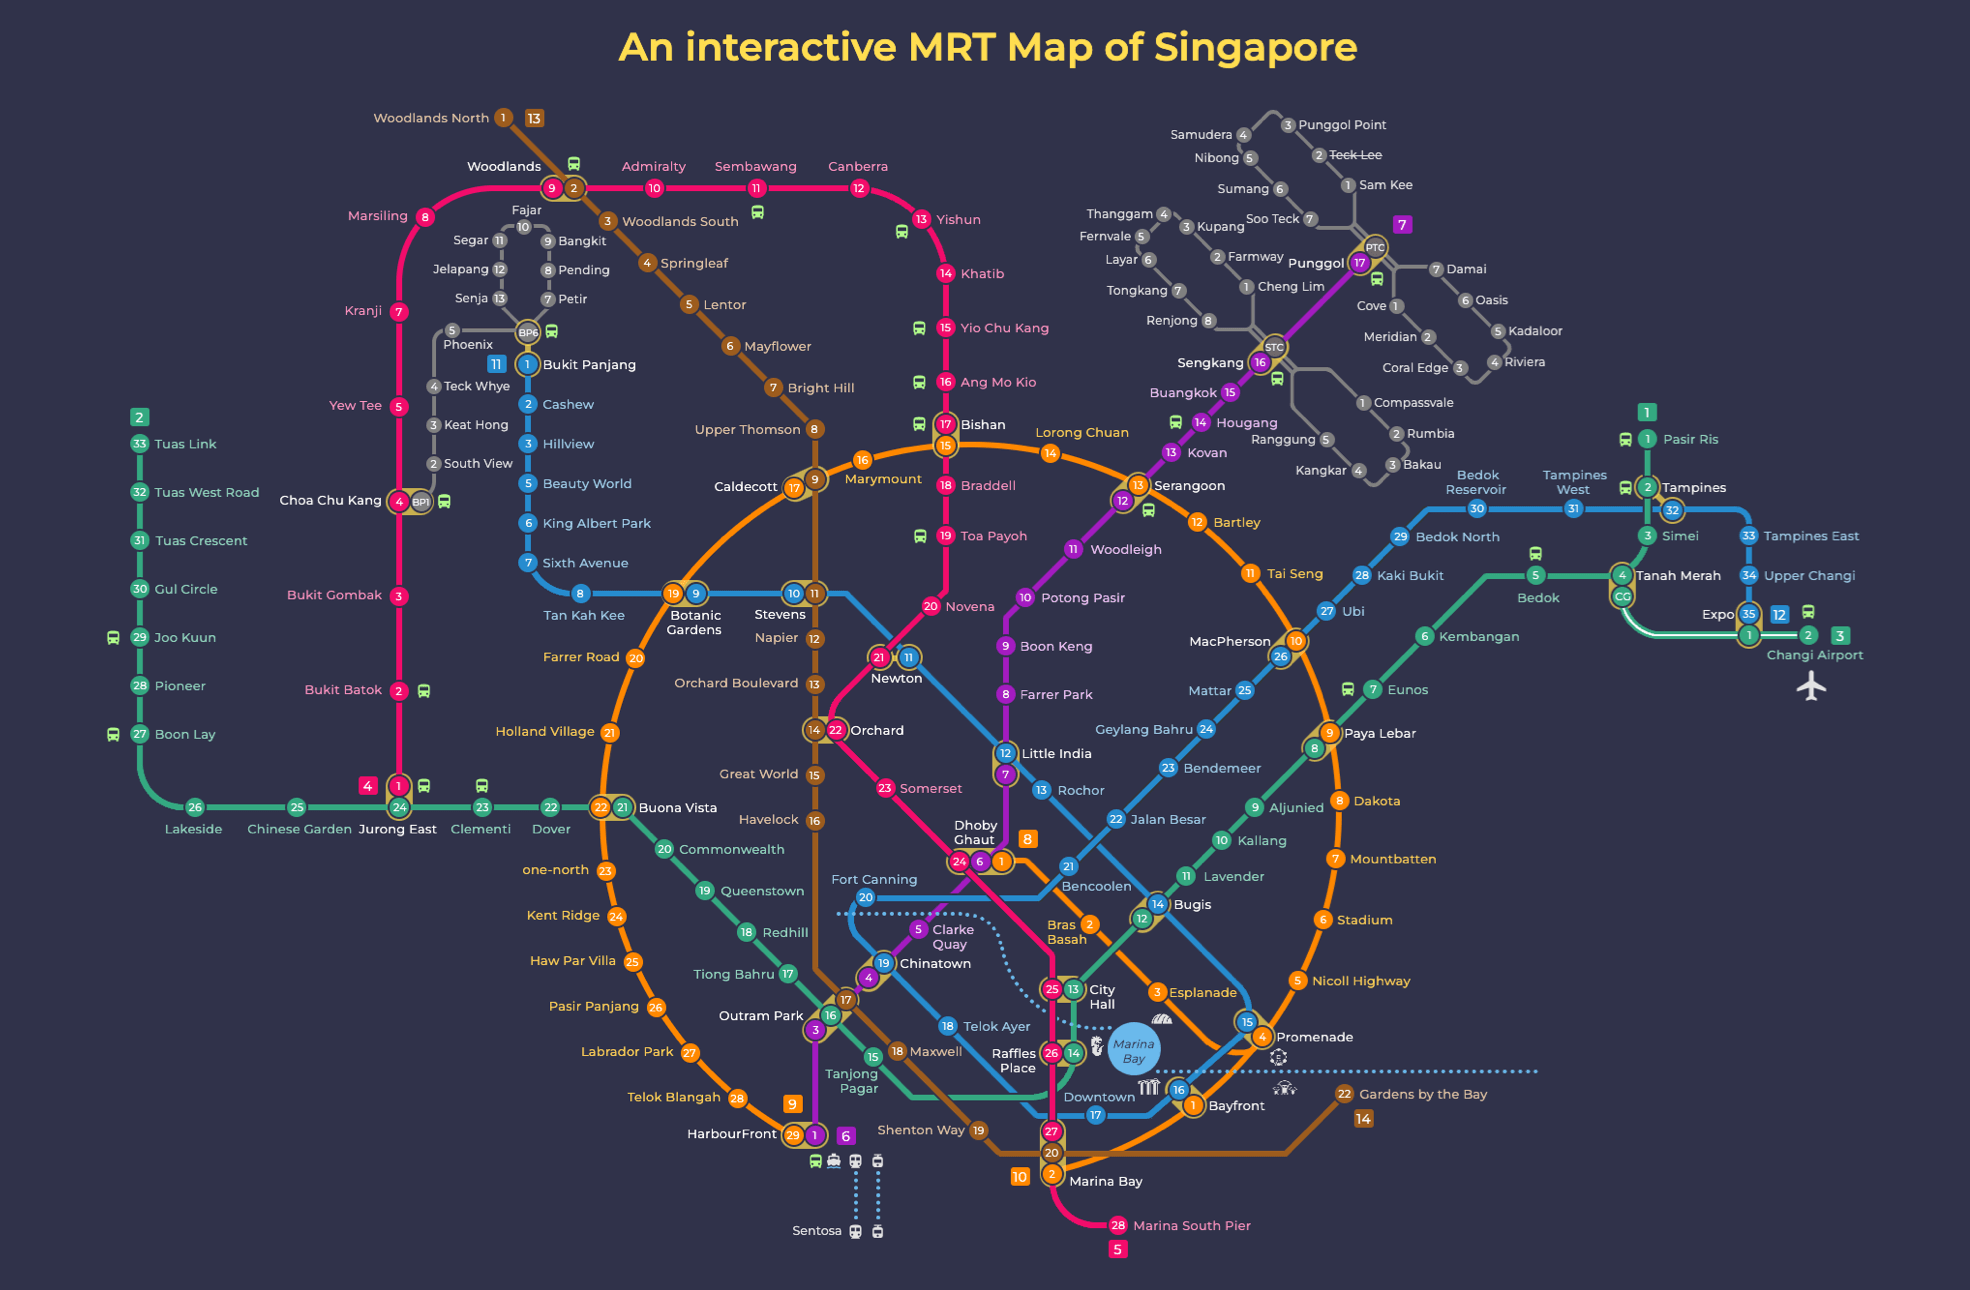 Map with overview of all MRT lines and stations in Singapore